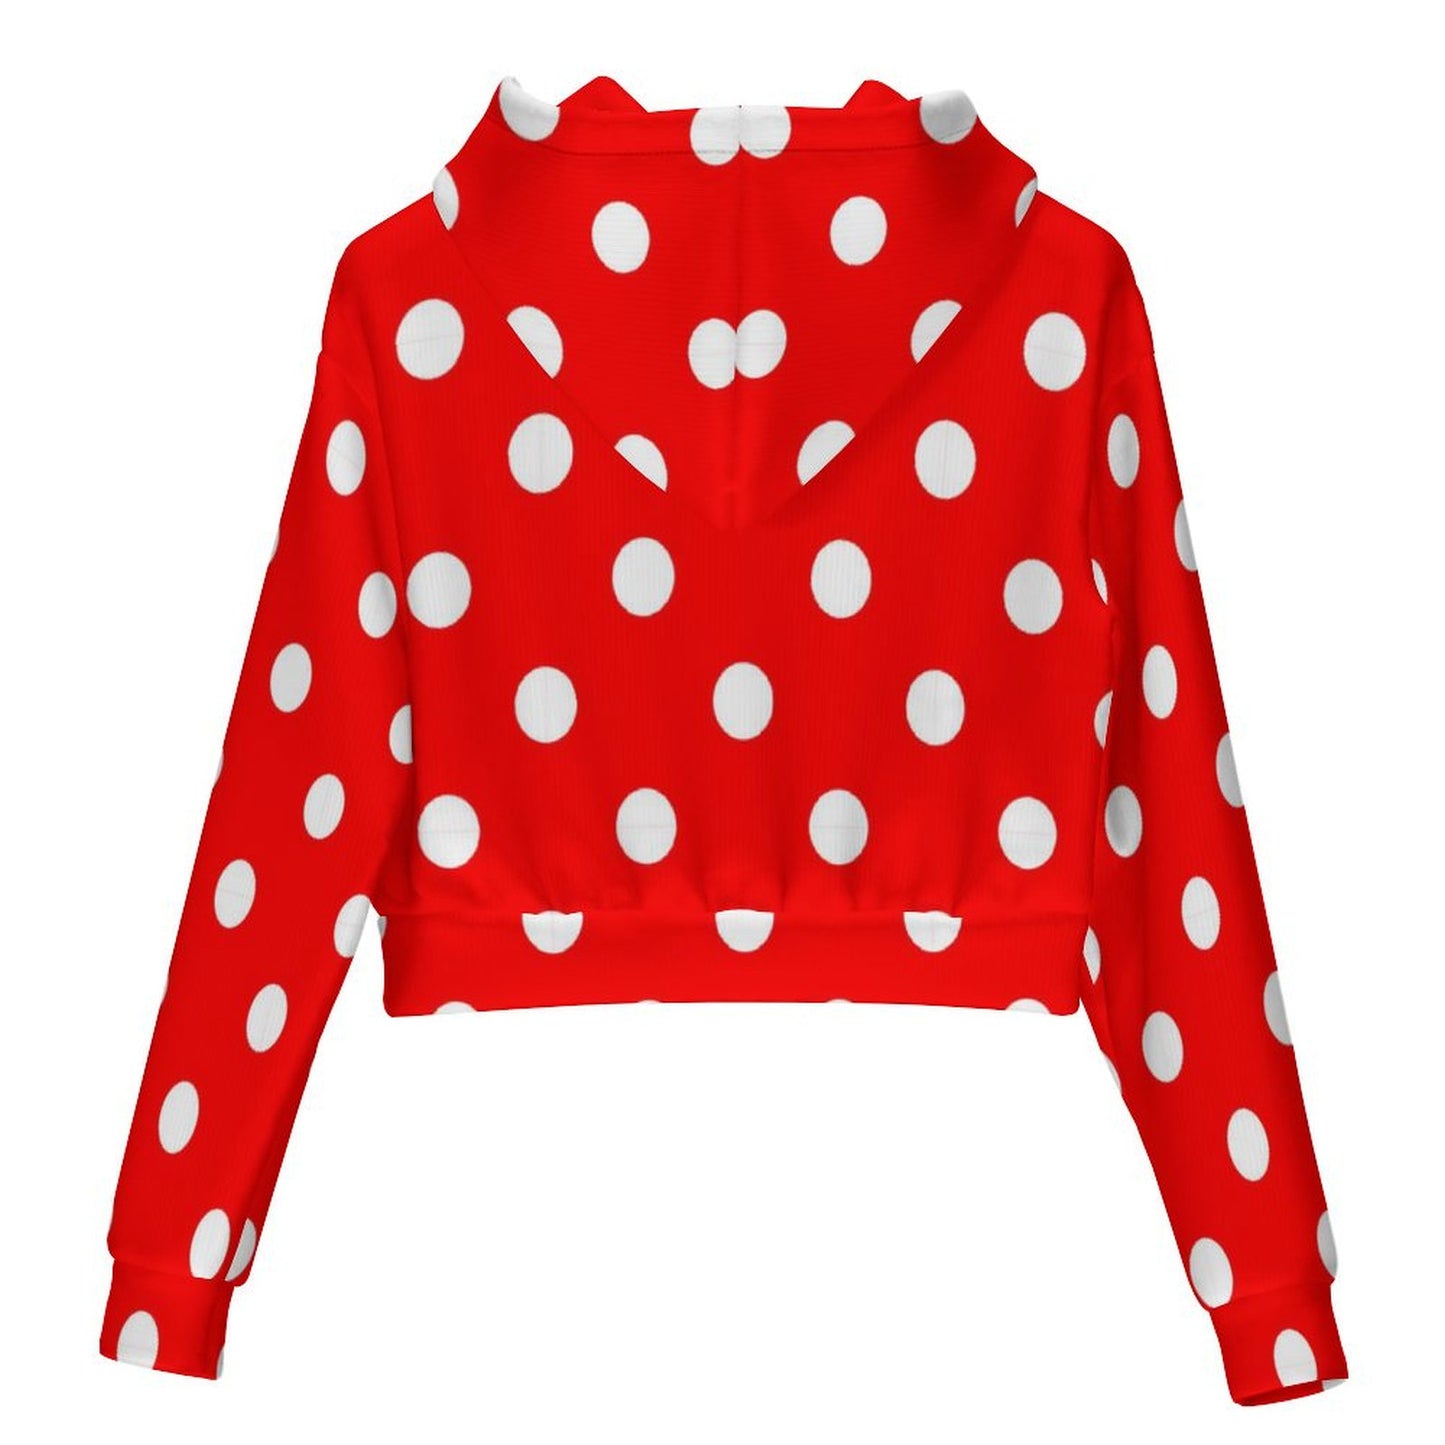 Red With White Polka Dots Women's Cropped Hoodie